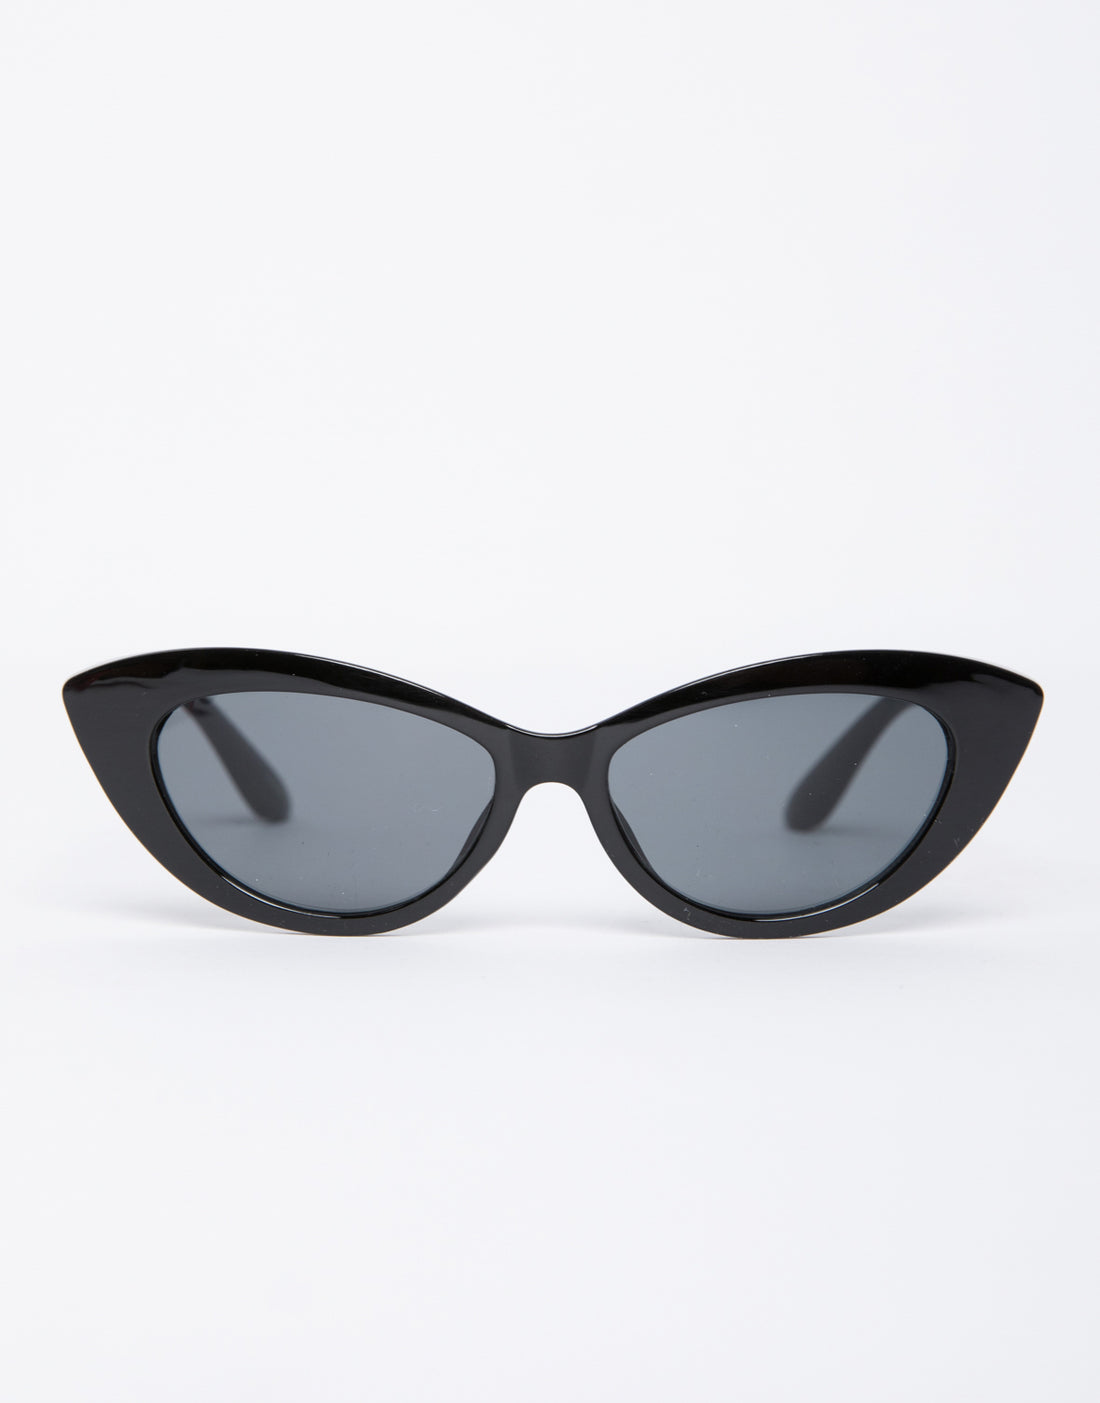 Off-duty Cat Eye Sunnies Accessories Black One Size -2020AVE